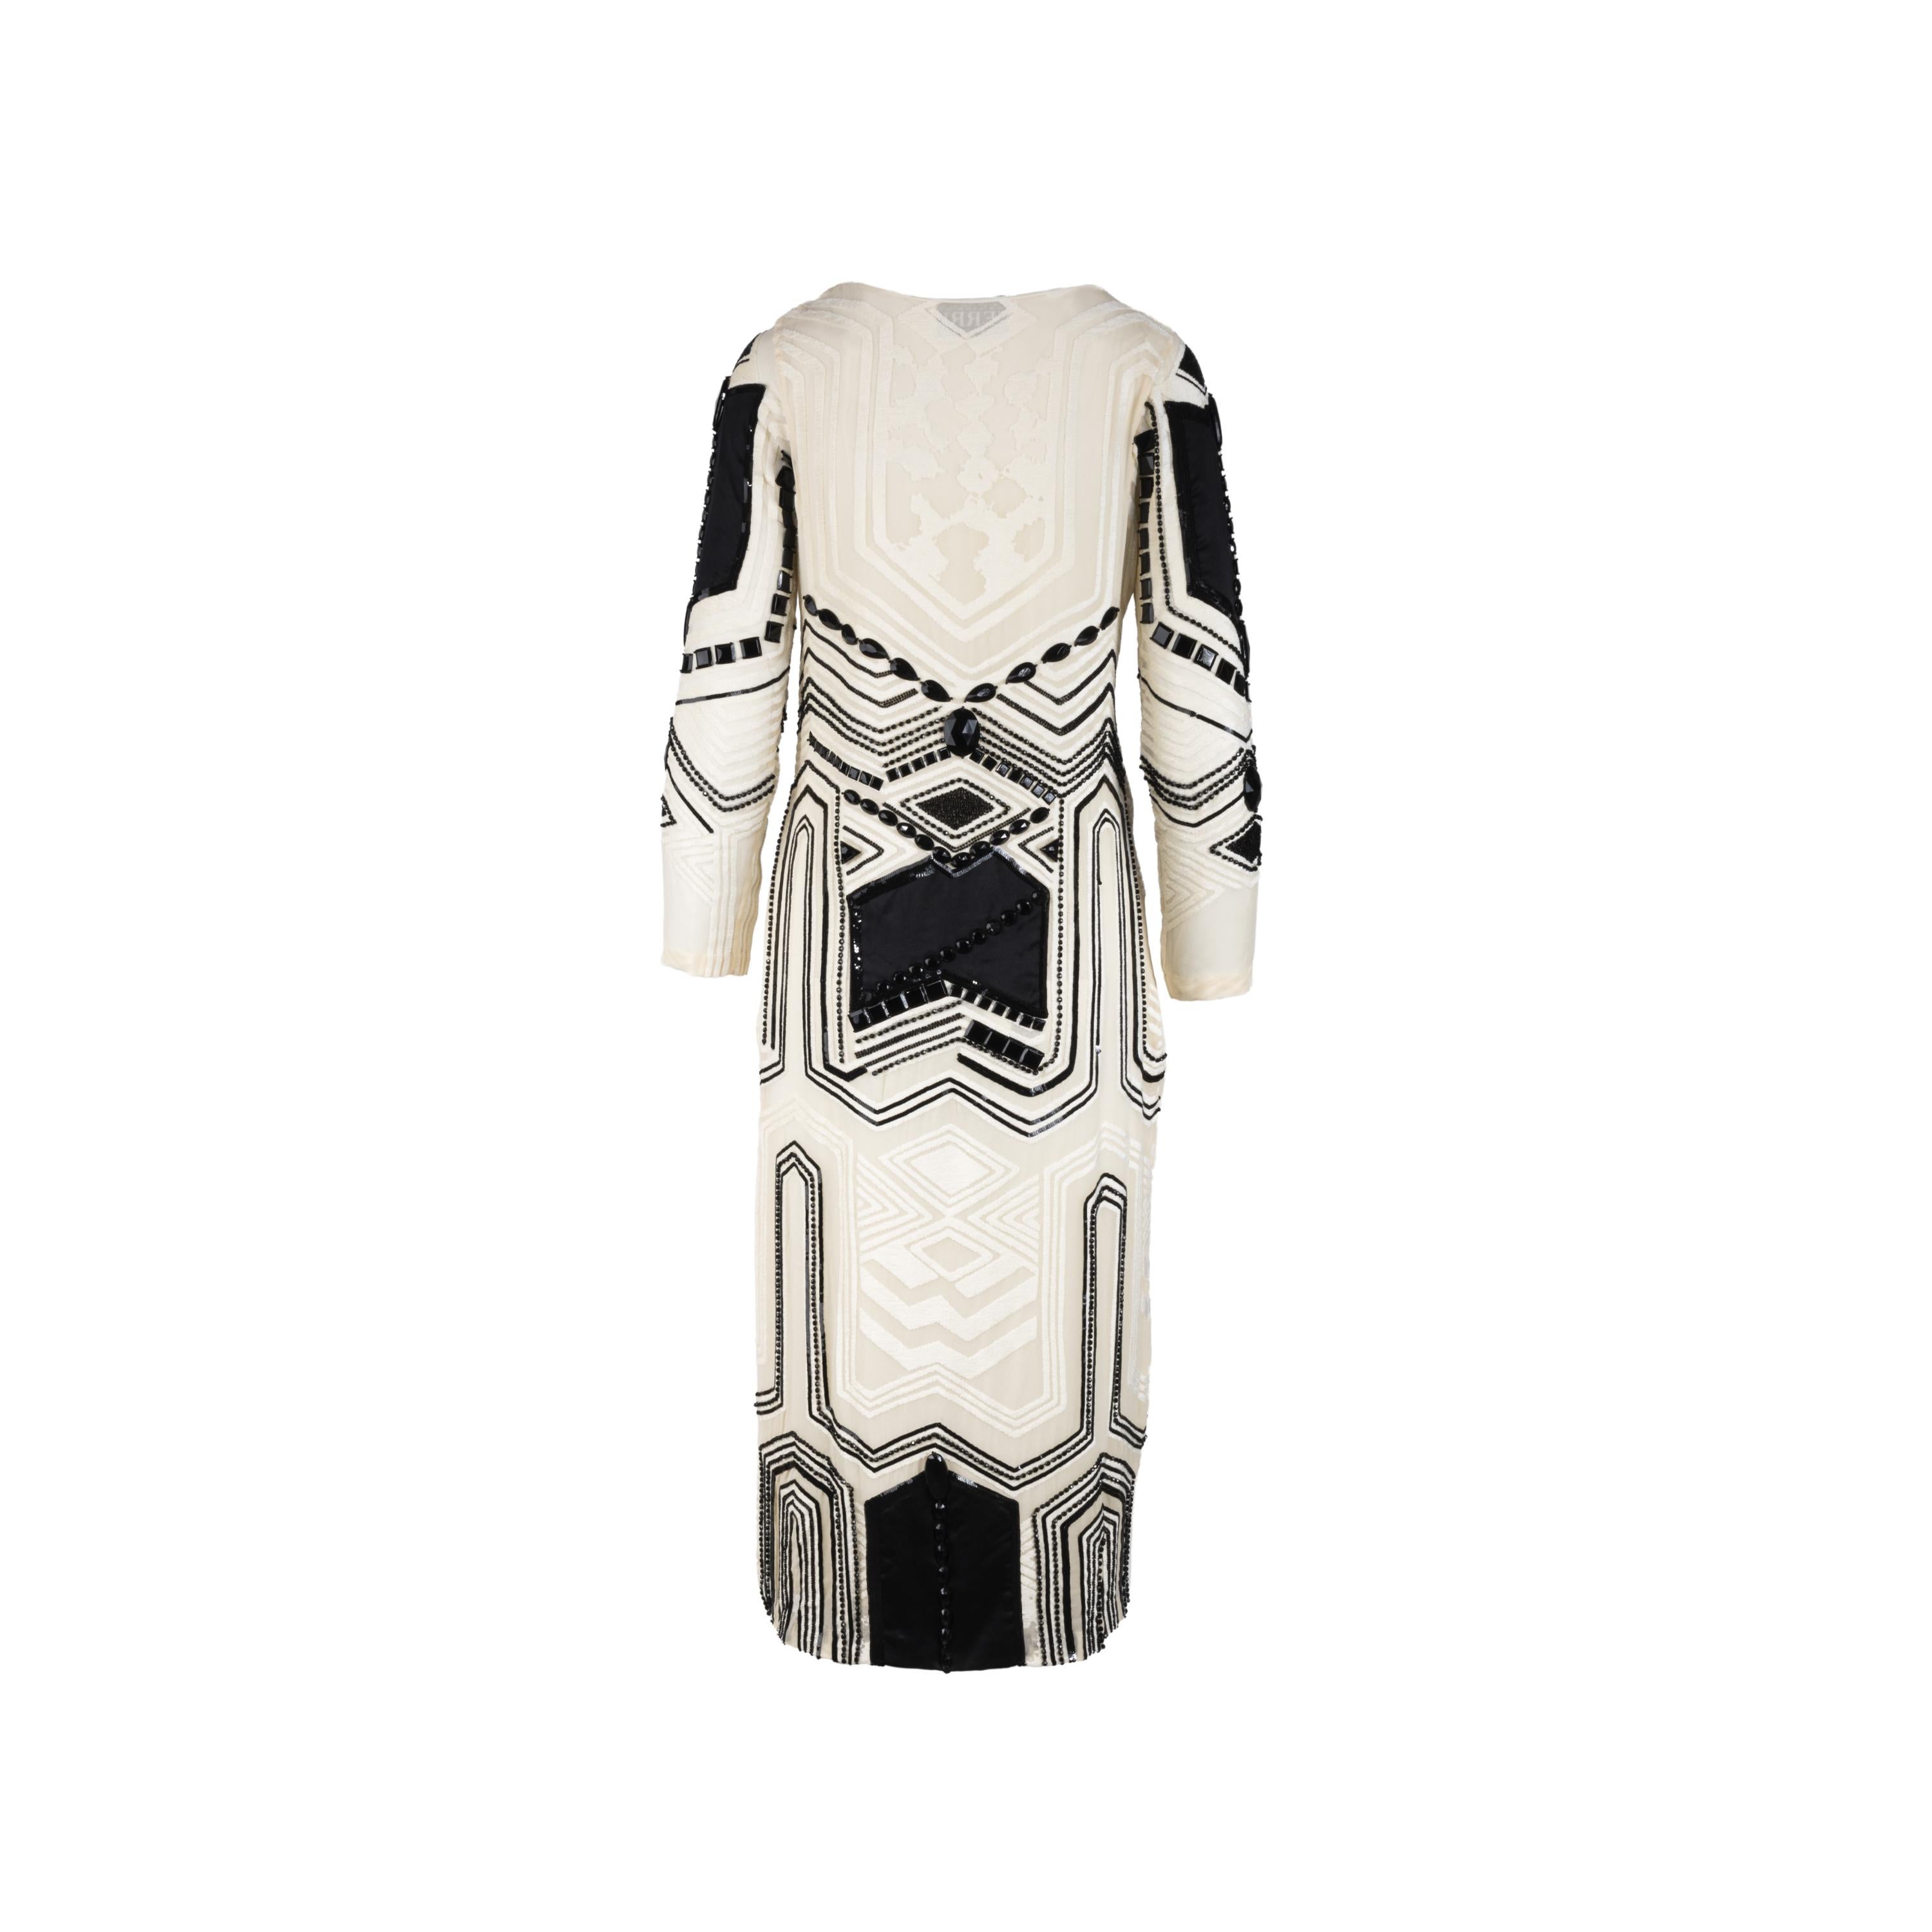 Gianfranco Ferré '90s cream coloured silk dress, embellished with geometric embroideries and faceted synthetic crystals of different shapes and black sequins. Midi length with three-quarter sleeves and deep neckline.